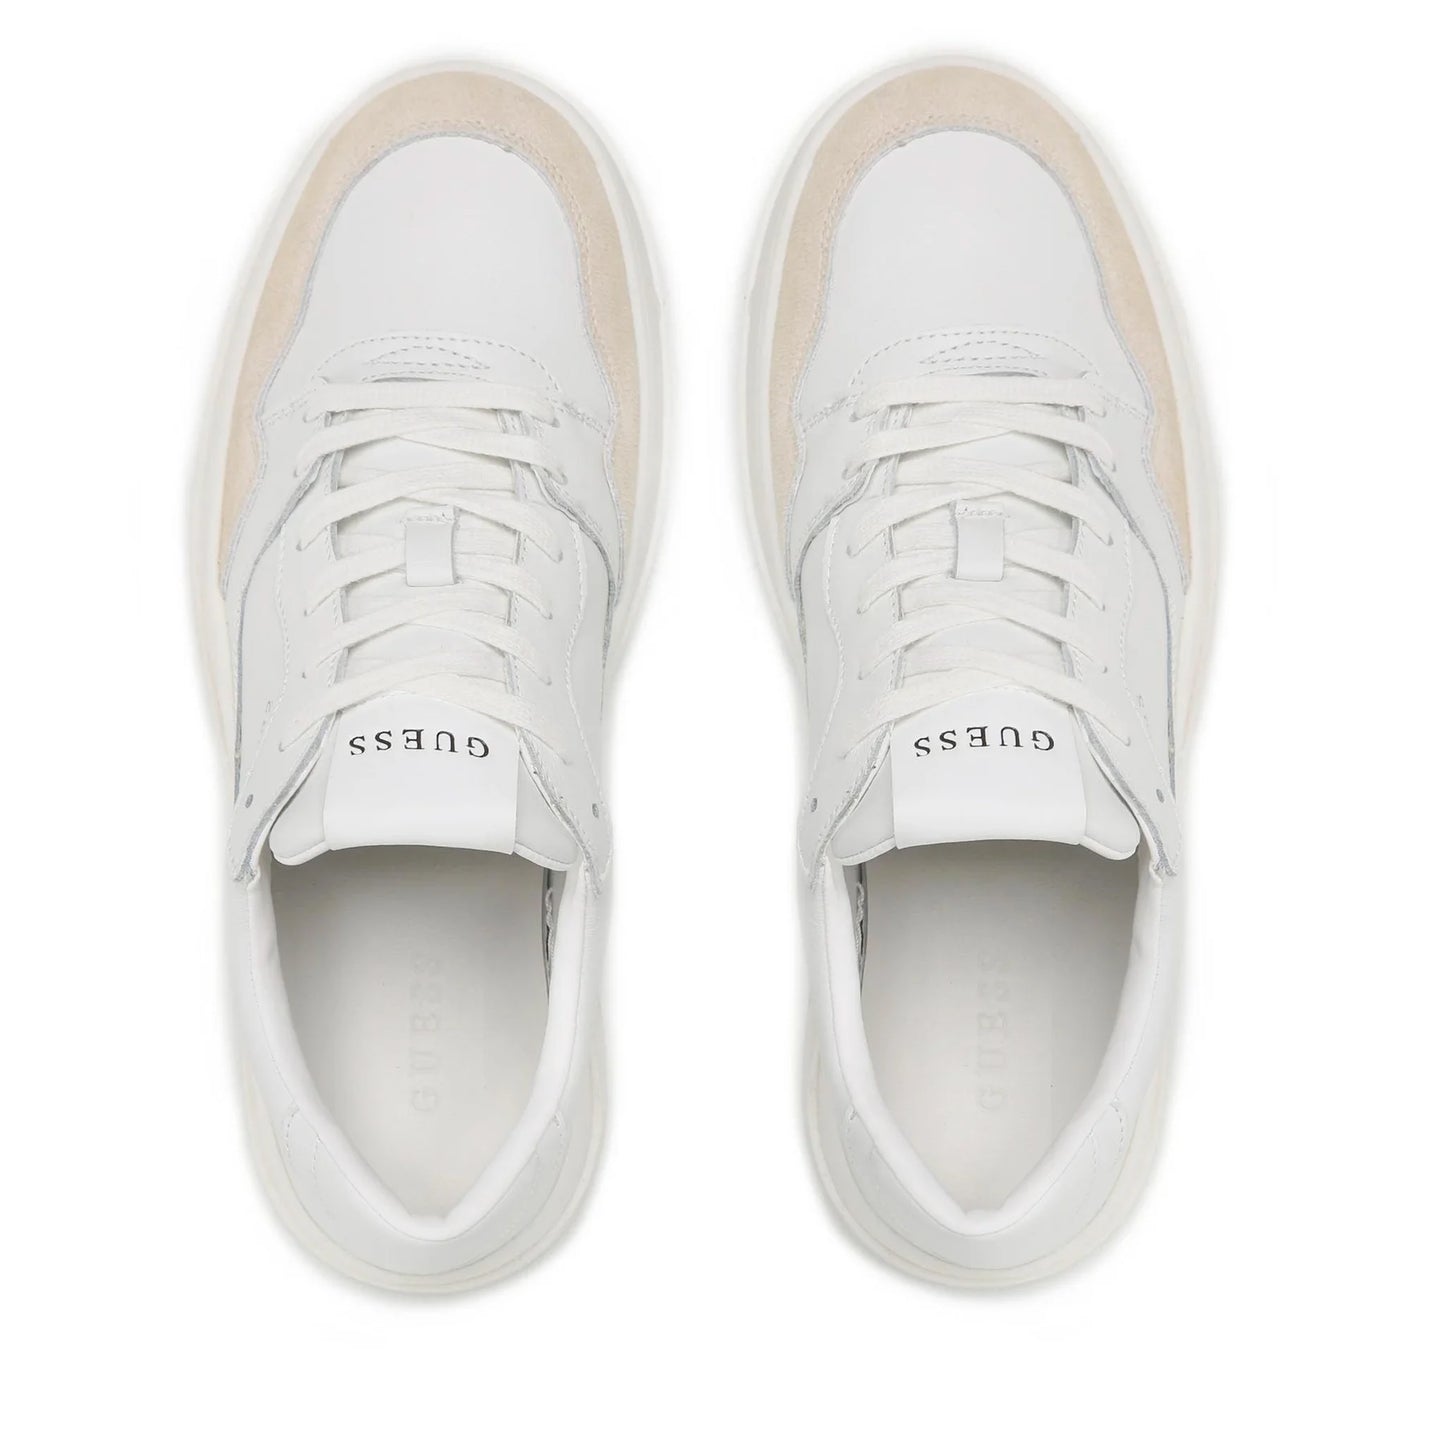 GUESS Sneakers Ciano - WHITE